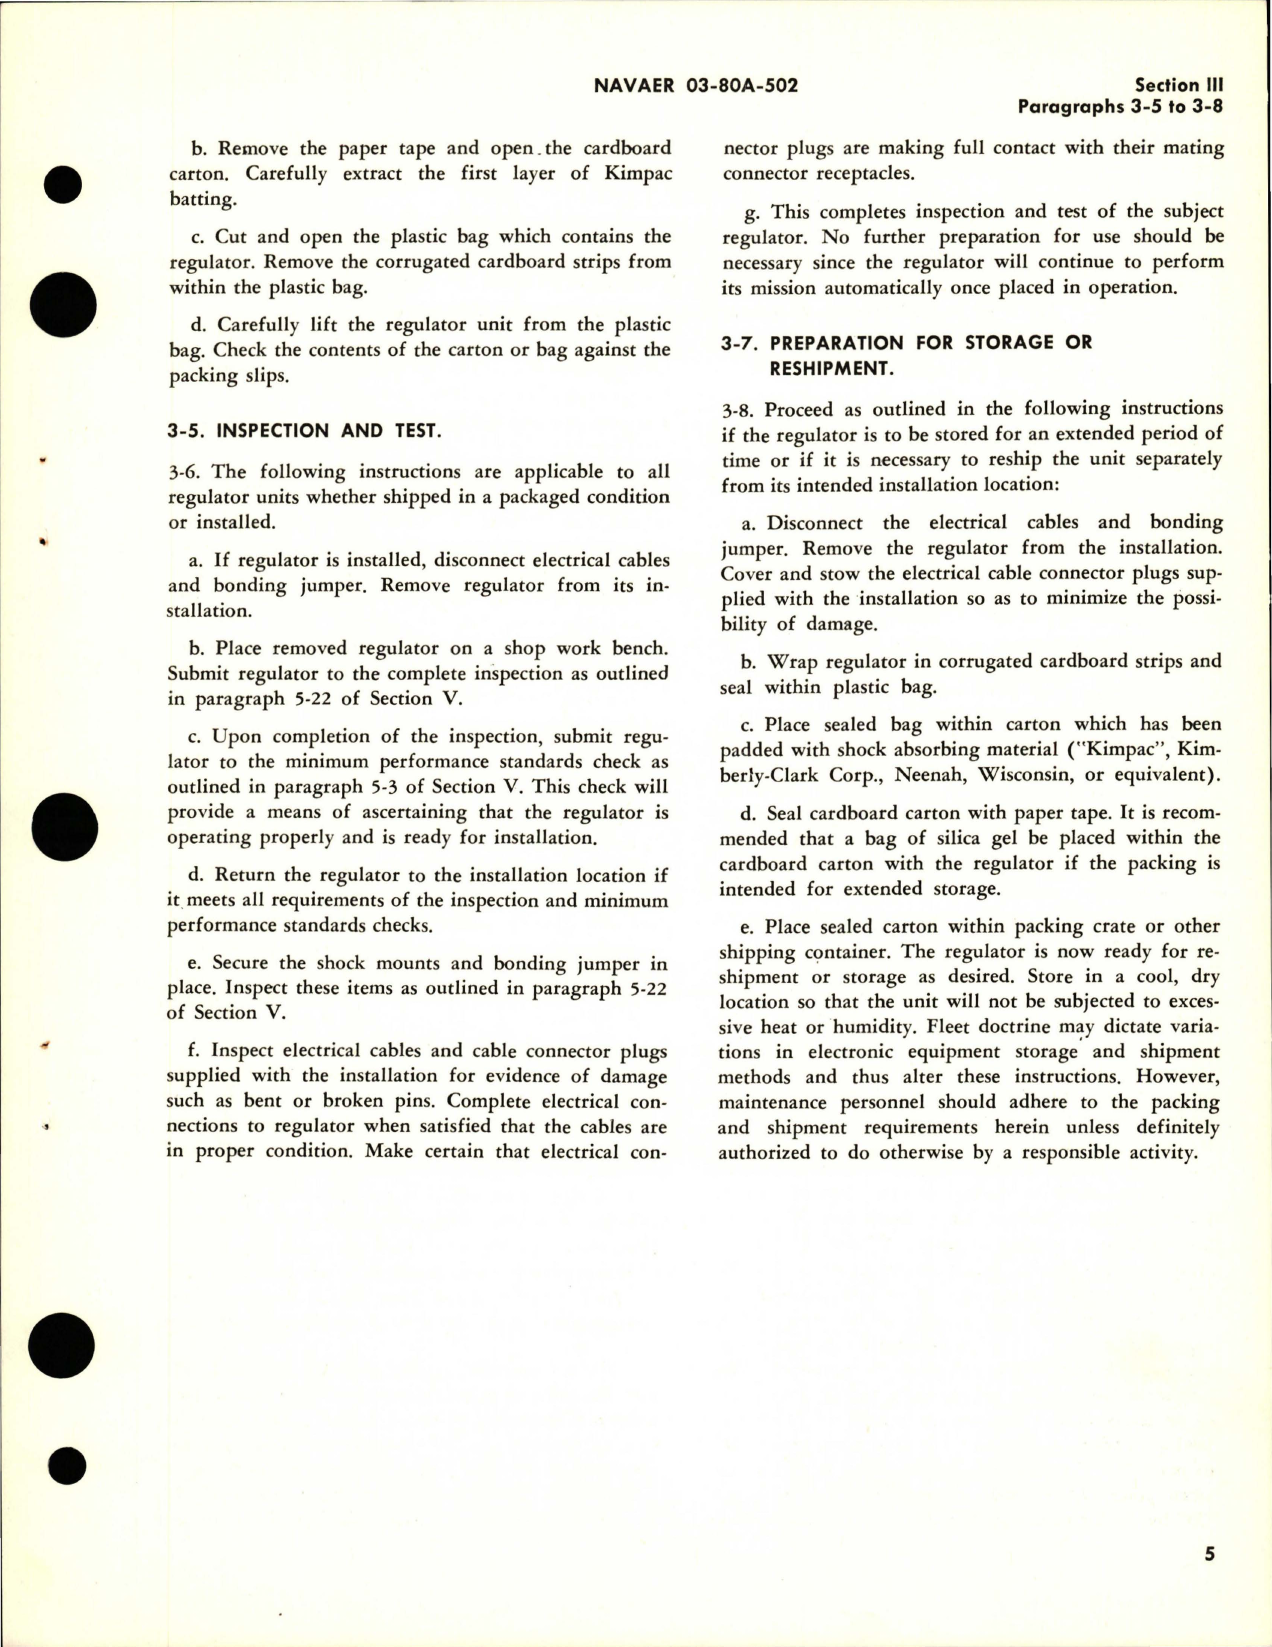 Sample page 9 from AirCorps Library document: Service Instructions for Electronic Cabin Temperature Regulator - Part 30074